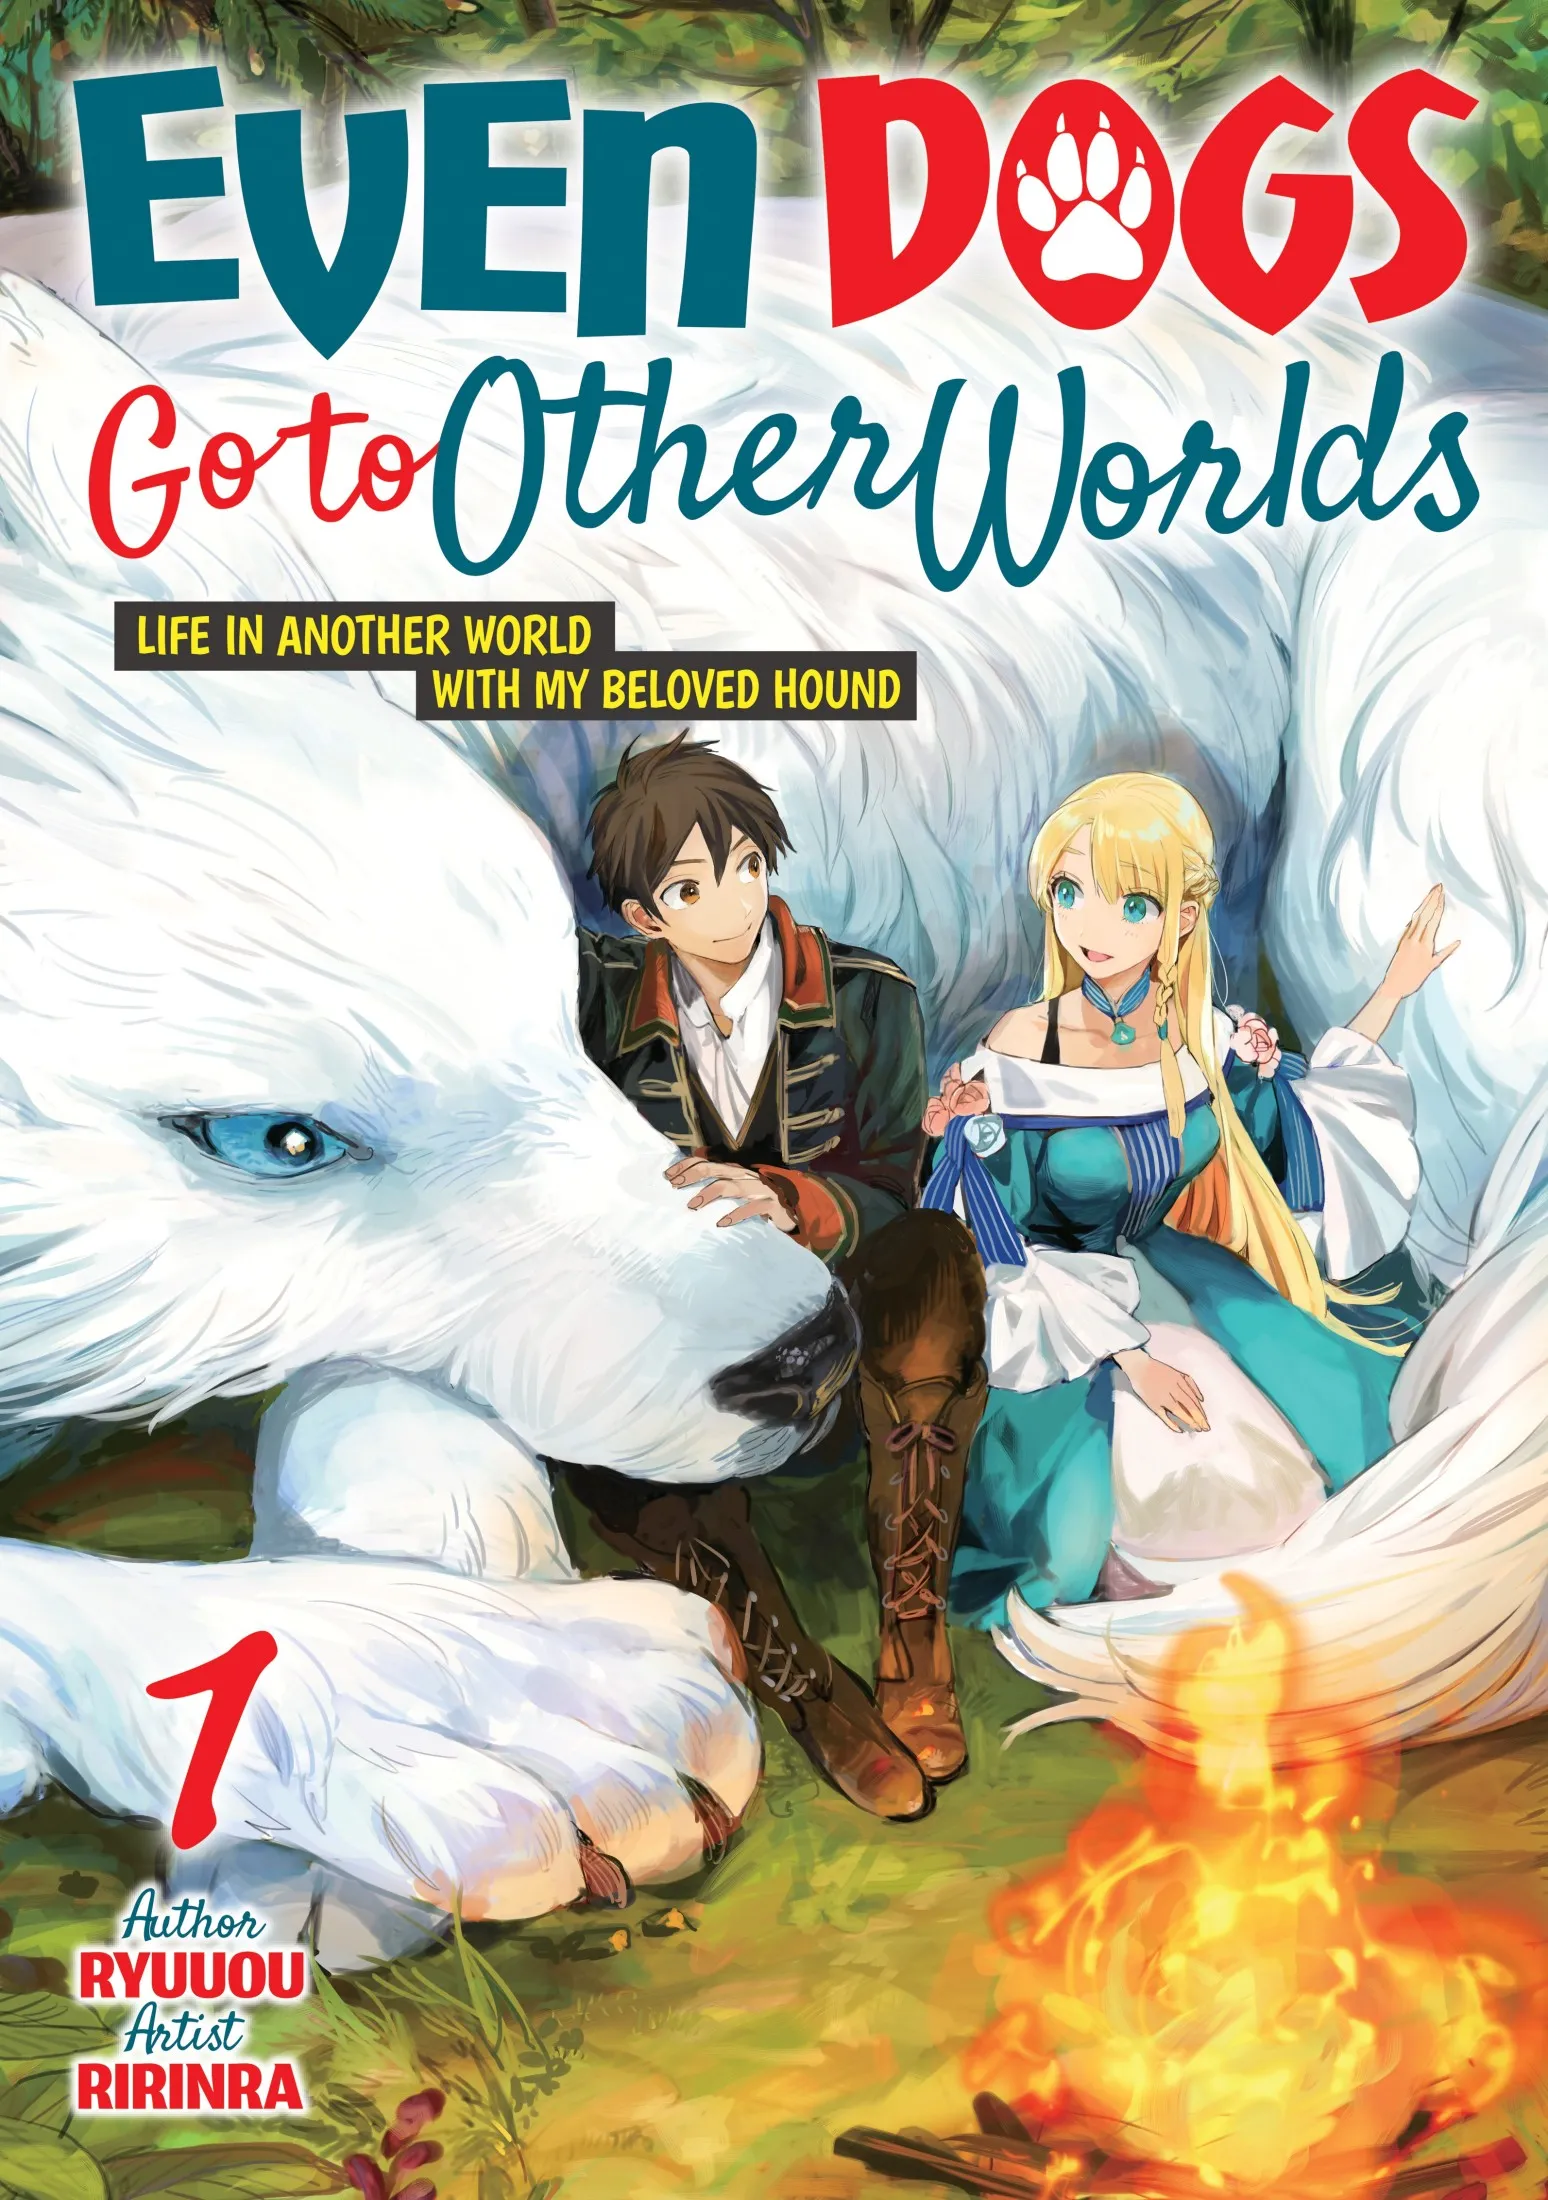 Even Dogs Go to Other Worlds: Life in Another World with My Beloved Hound (Manga) Vol. 1 (Even Dogs Go to Other Worlds #1)